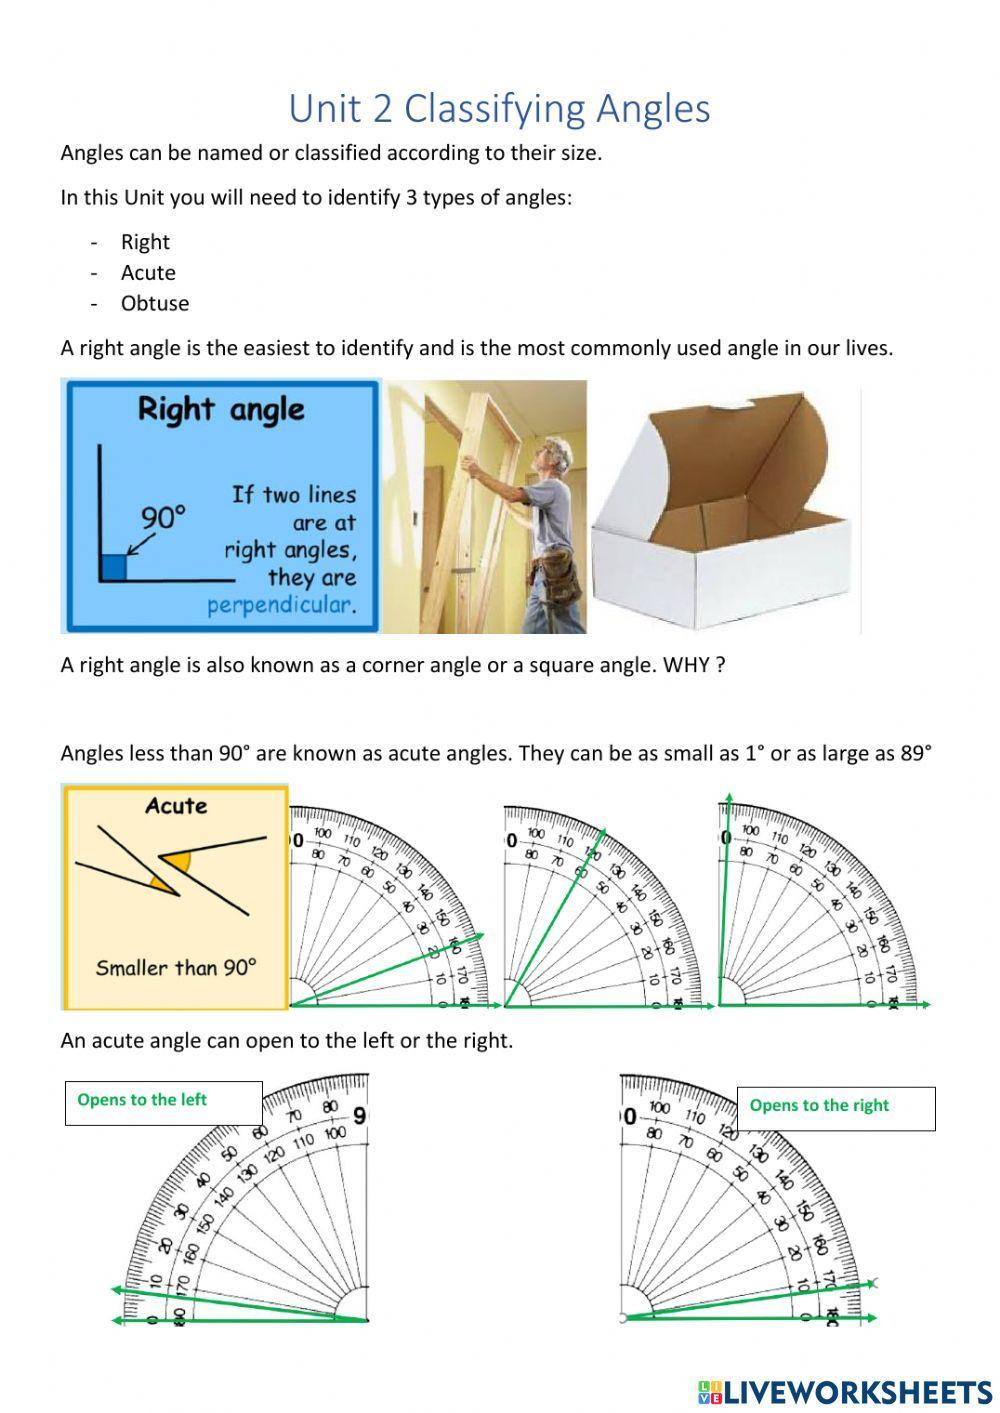 CHILL5 Math Angles Identifying Types of Angles